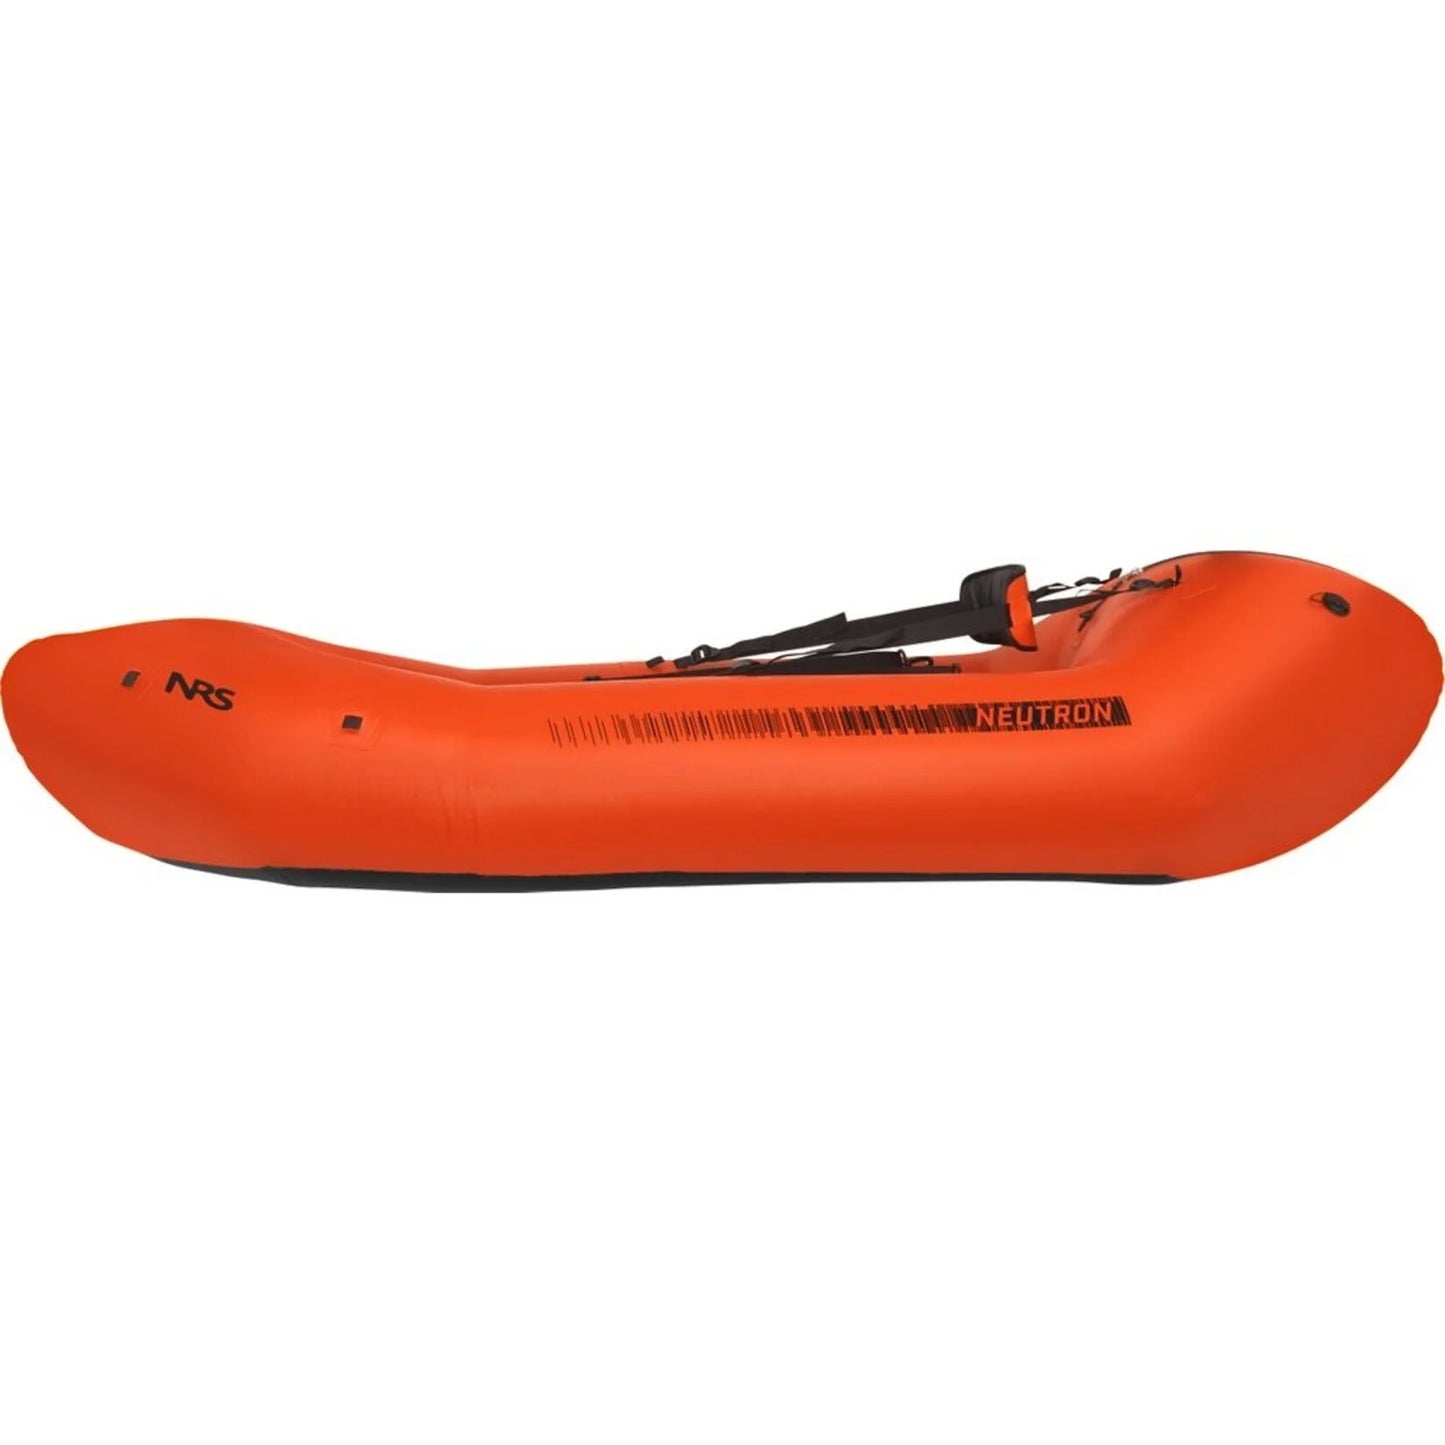 An NRS Neutron Packraft on a white background perfect for whitewater journeys.